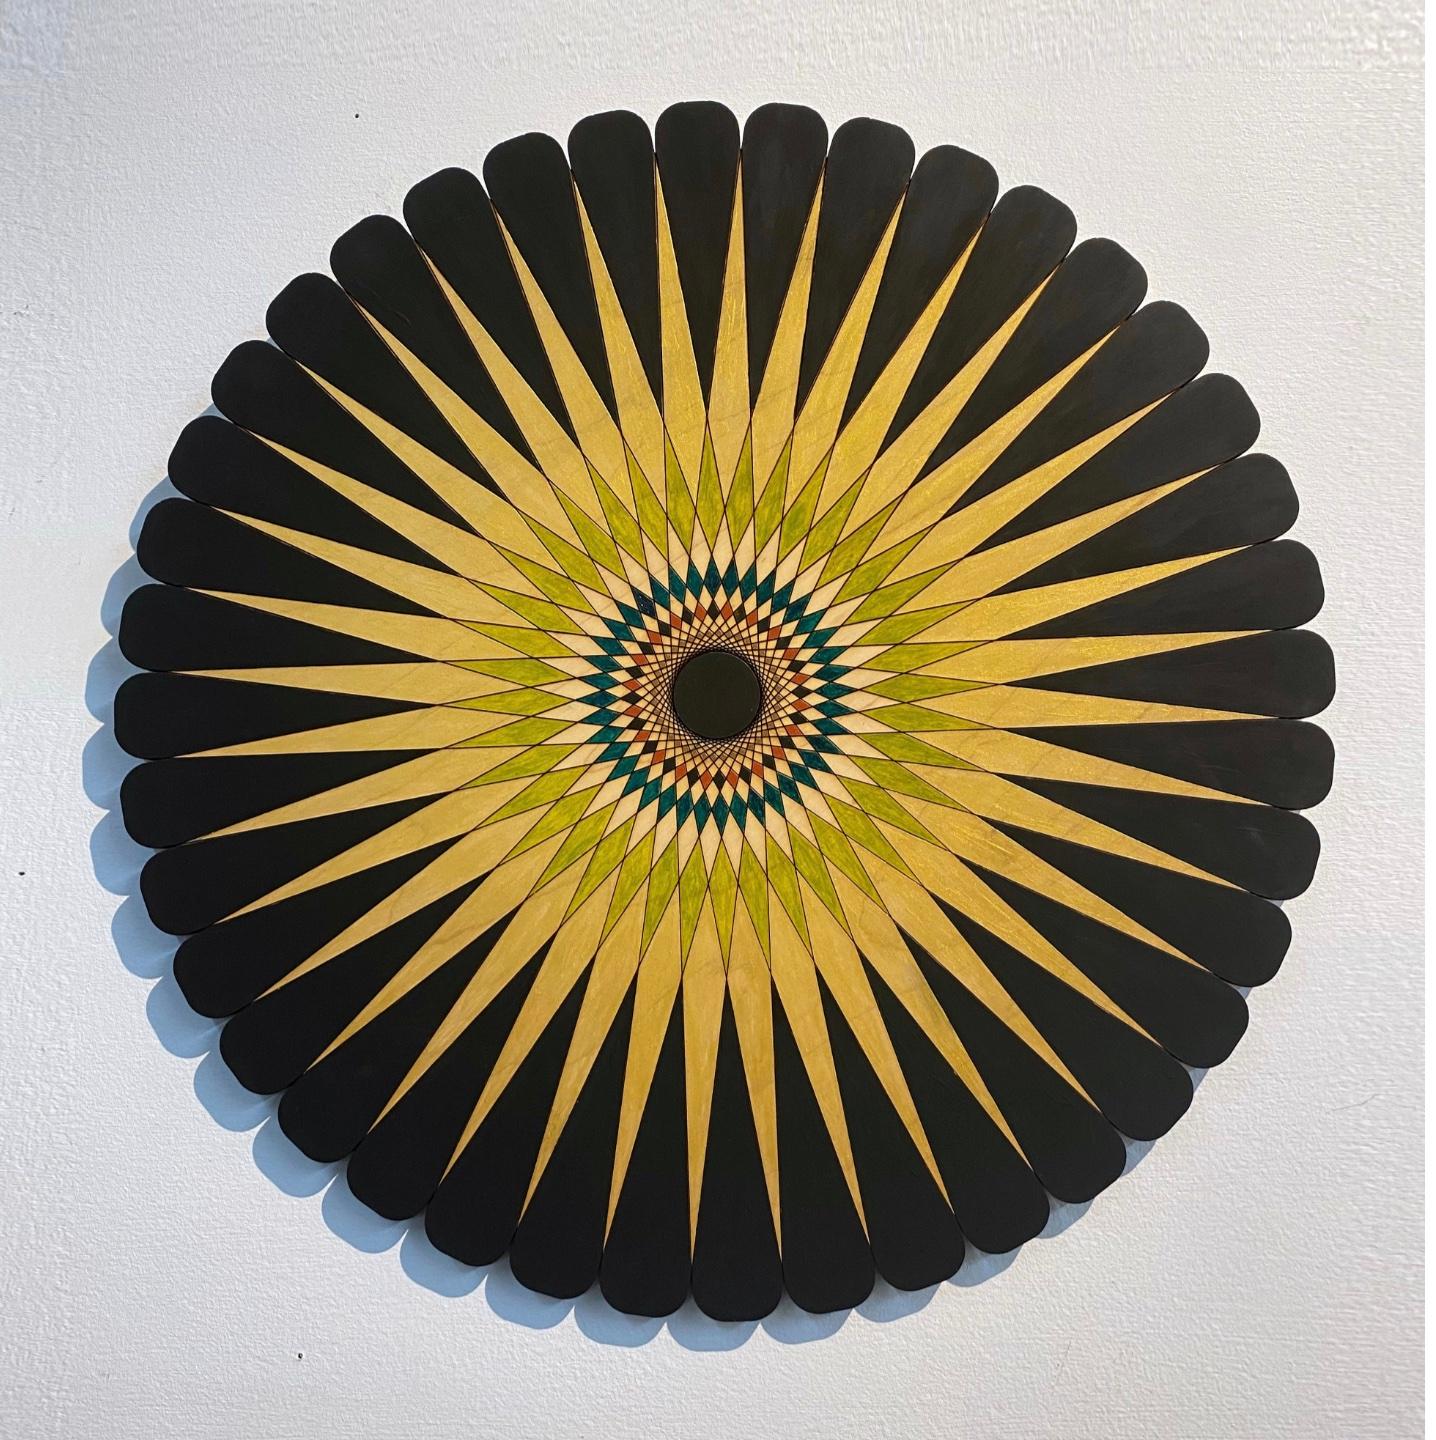 Starburst 5, golden geometrical circular painting, Acrylic on Wood, Signed by artist.

ARTIST BIO
Christine Romanell’s colorful wall sculptures and installations explore non-repeating patterns informed by cosmology and physics, while rooting itself